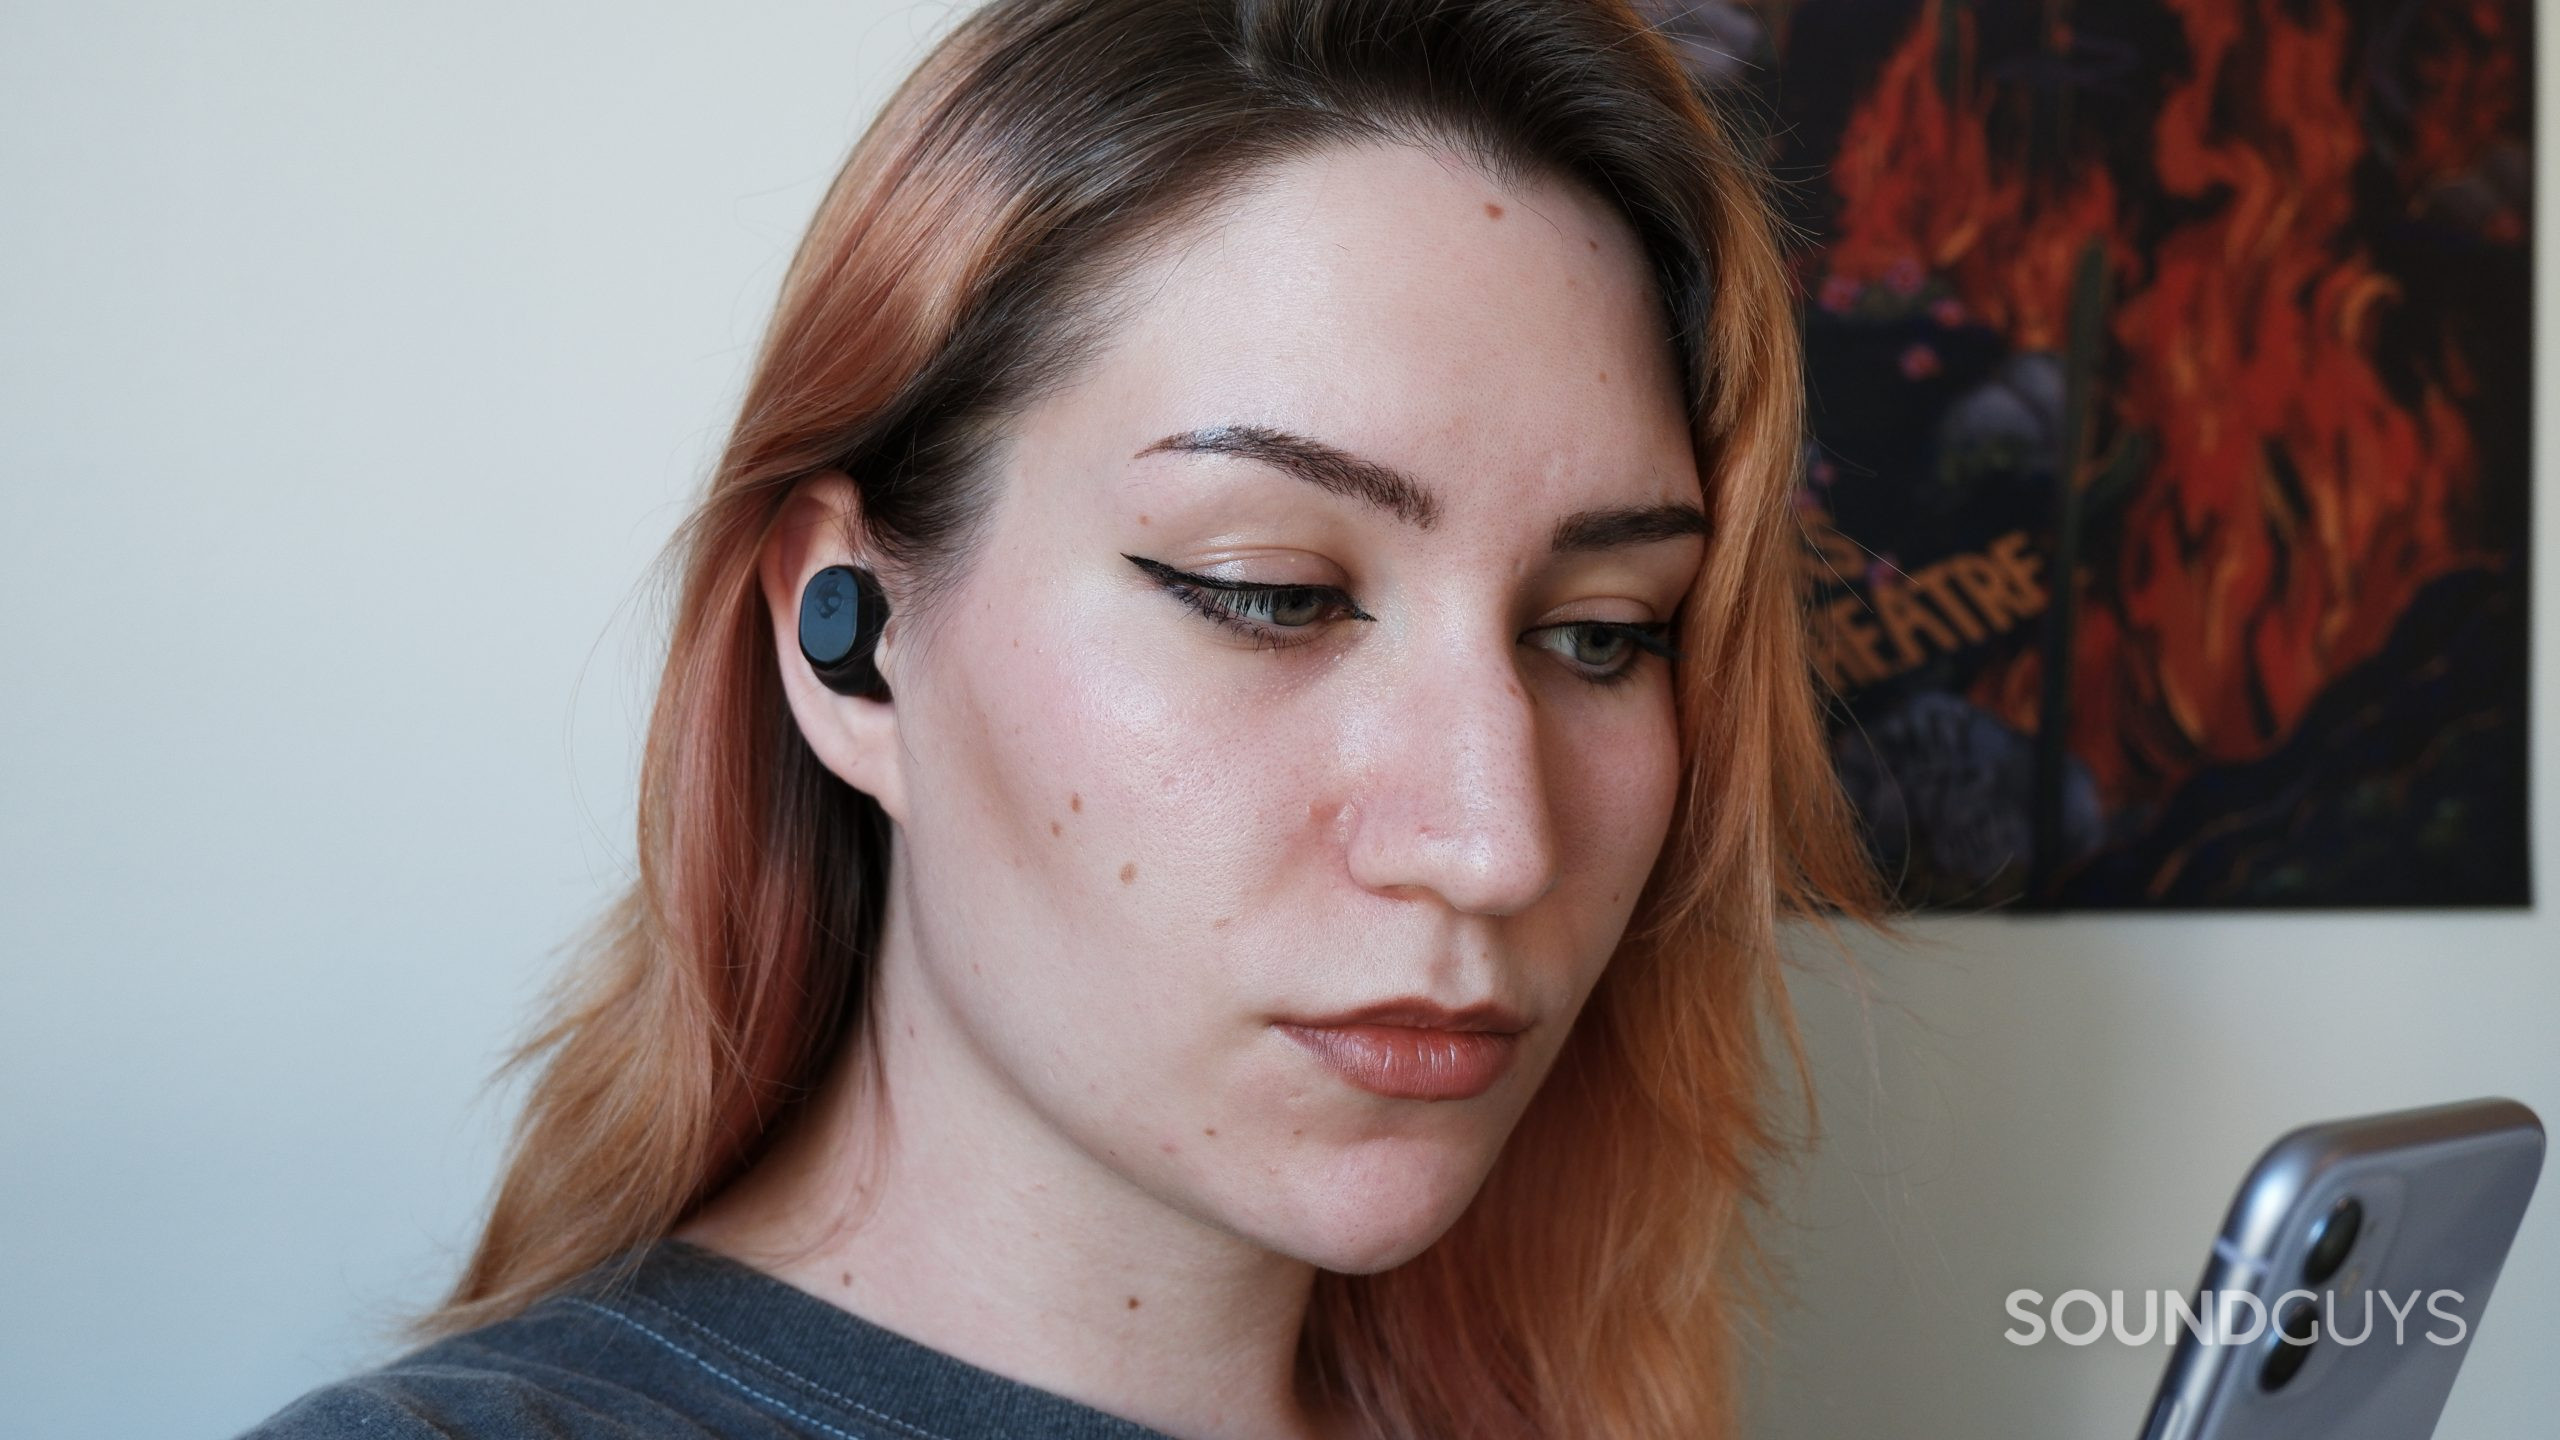 The Skullcandy Mod XT being worn by a person while they hold a phone.